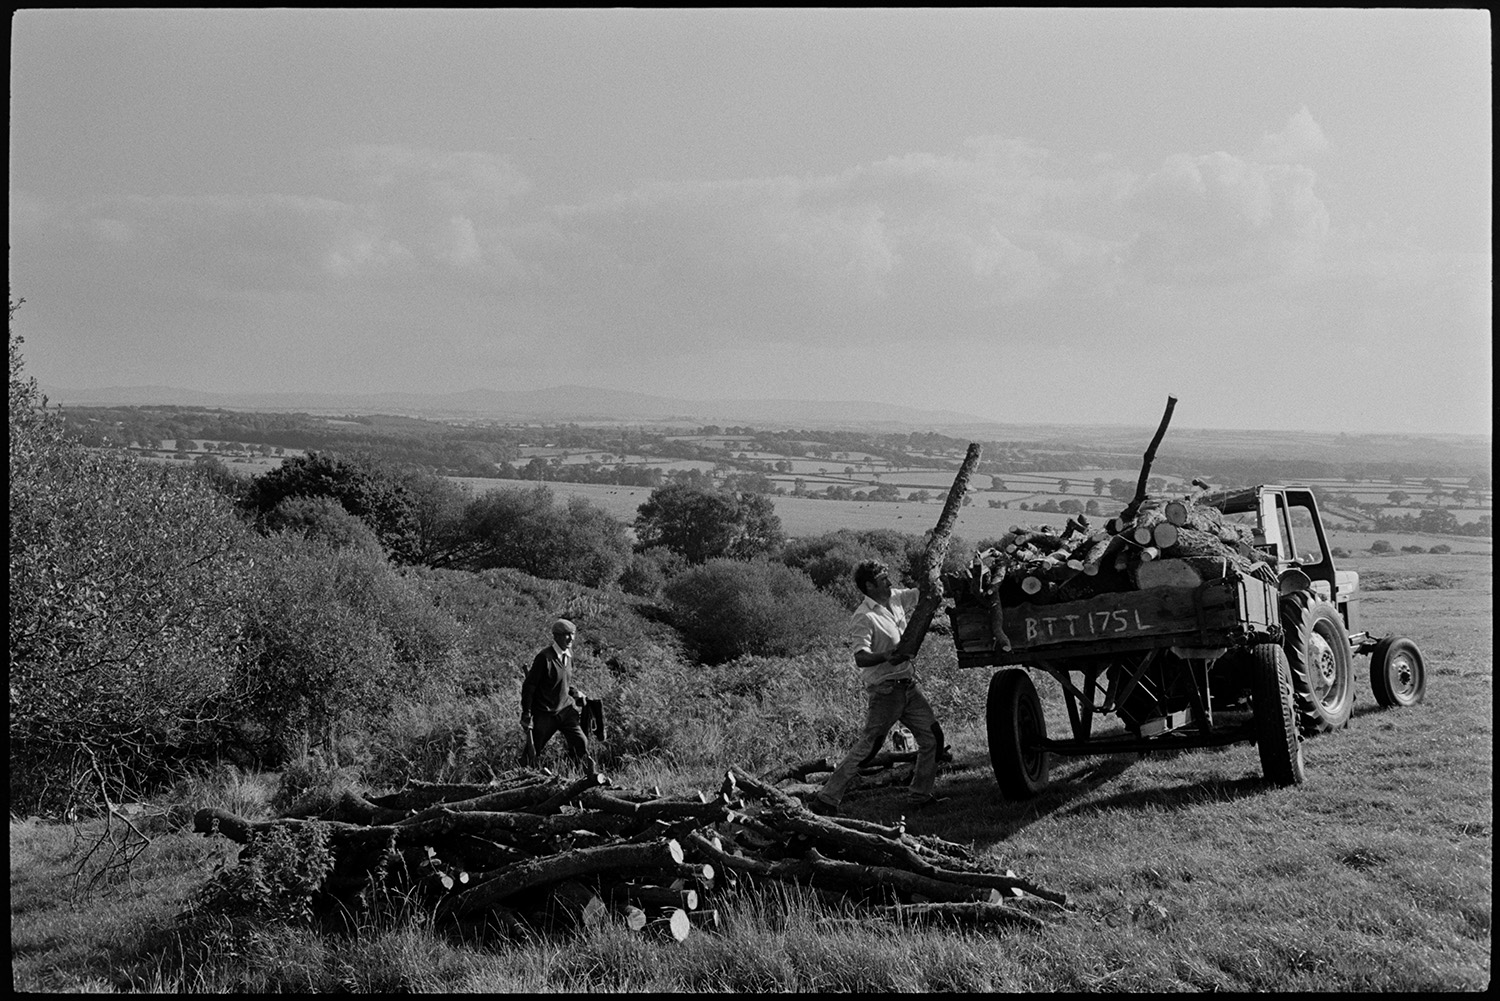 Men cutting trees on moor, and loading logs onto trailer. View to Dartmoor.
[Men loading cut branches into a trailer on Hatherleigh moor, with a landscape  of field and trees in the background. Dartmoor is visible on the horizon.]